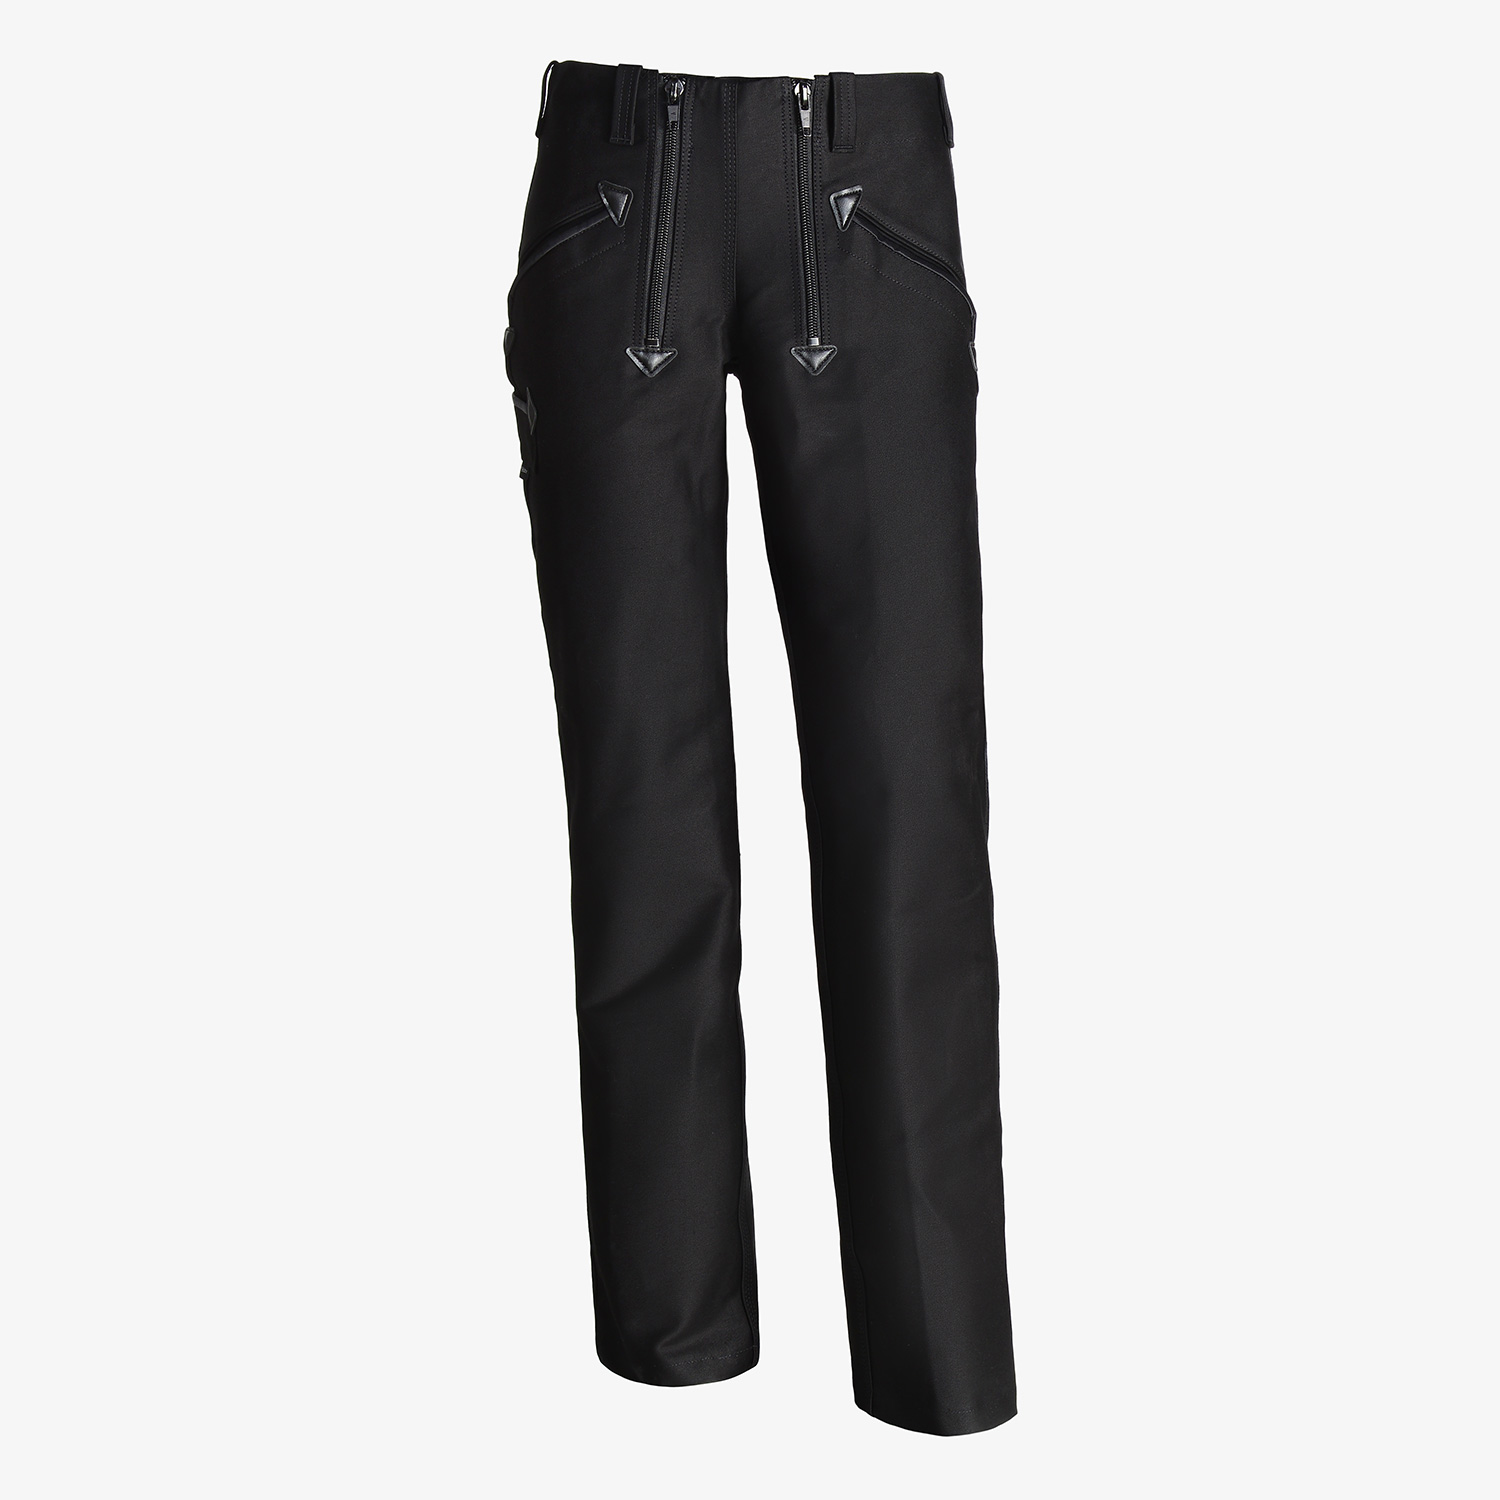 MARC guild trousers moleskin without bell bottom